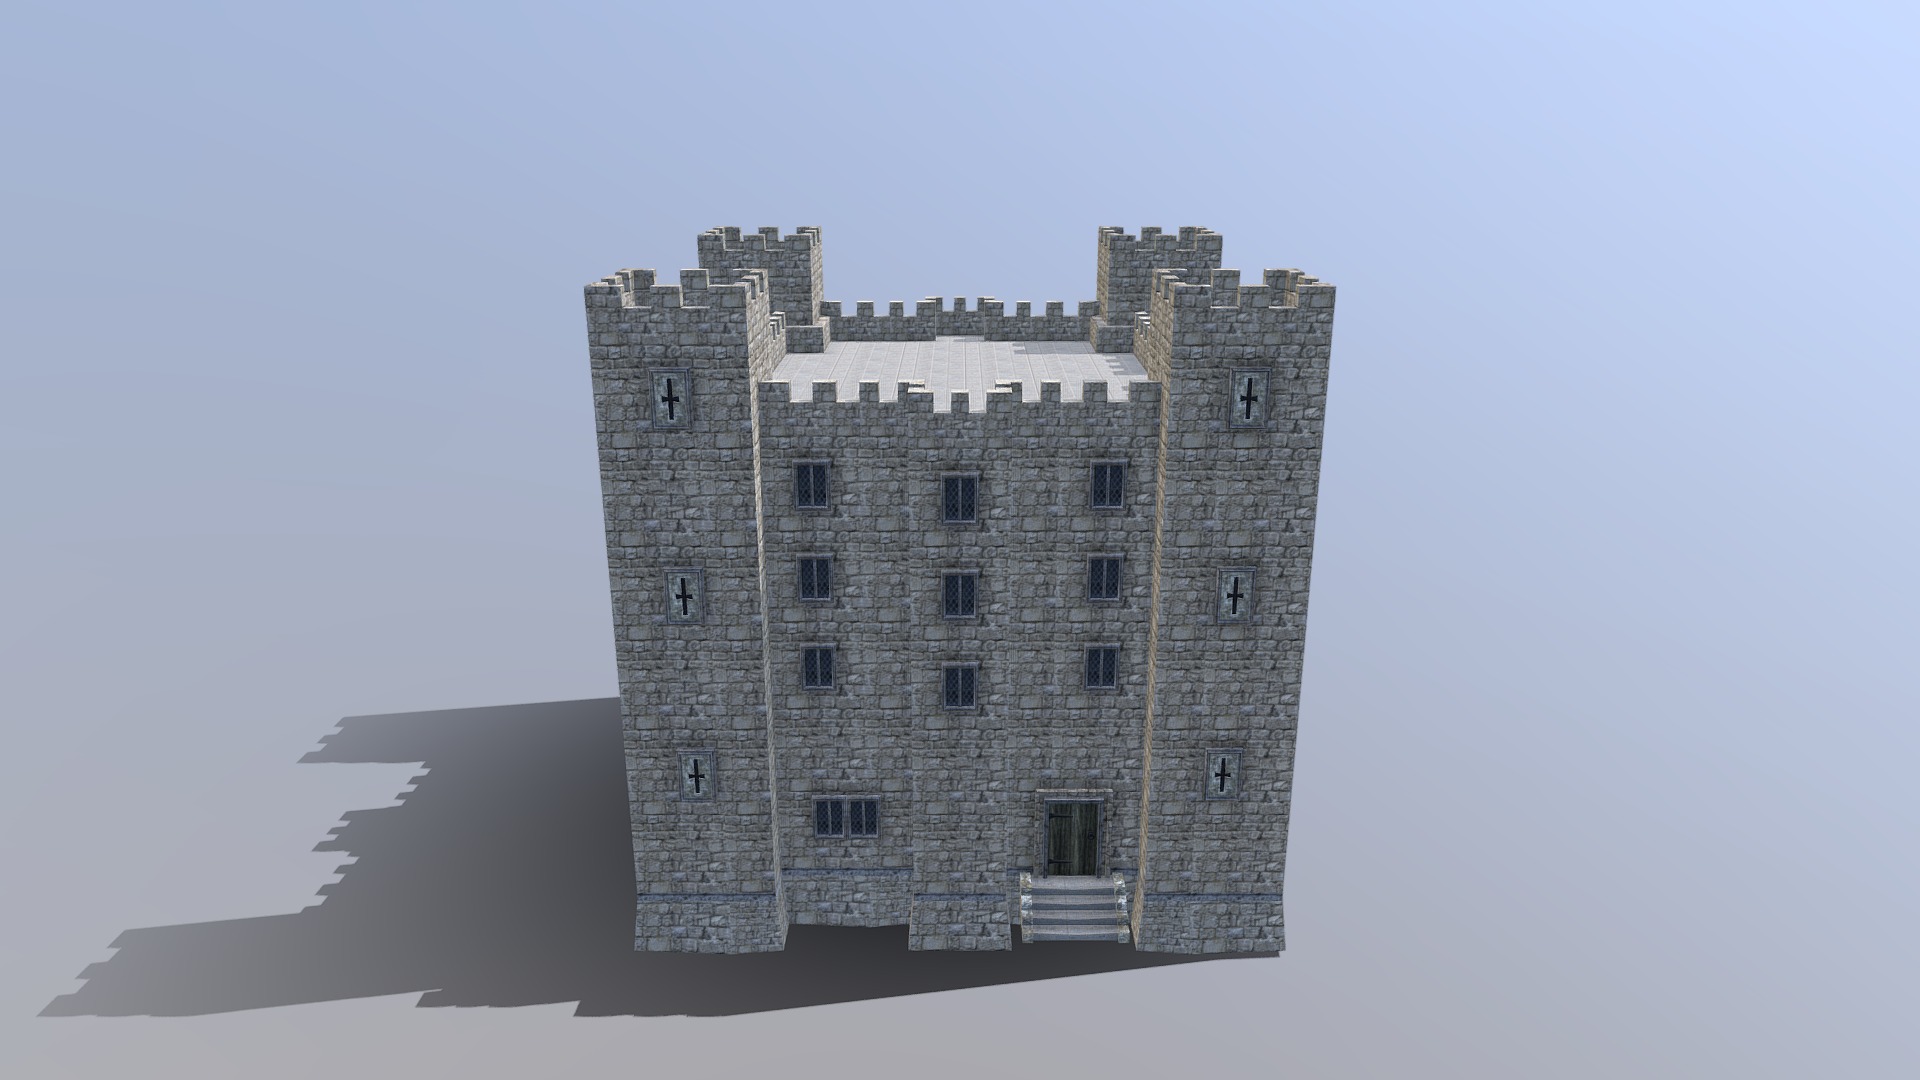 3D model BSR – Celtic Castle Keep - This is a 3D model of the BSR - Celtic Castle Keep. The 3D model is about a stone castle on a hill.